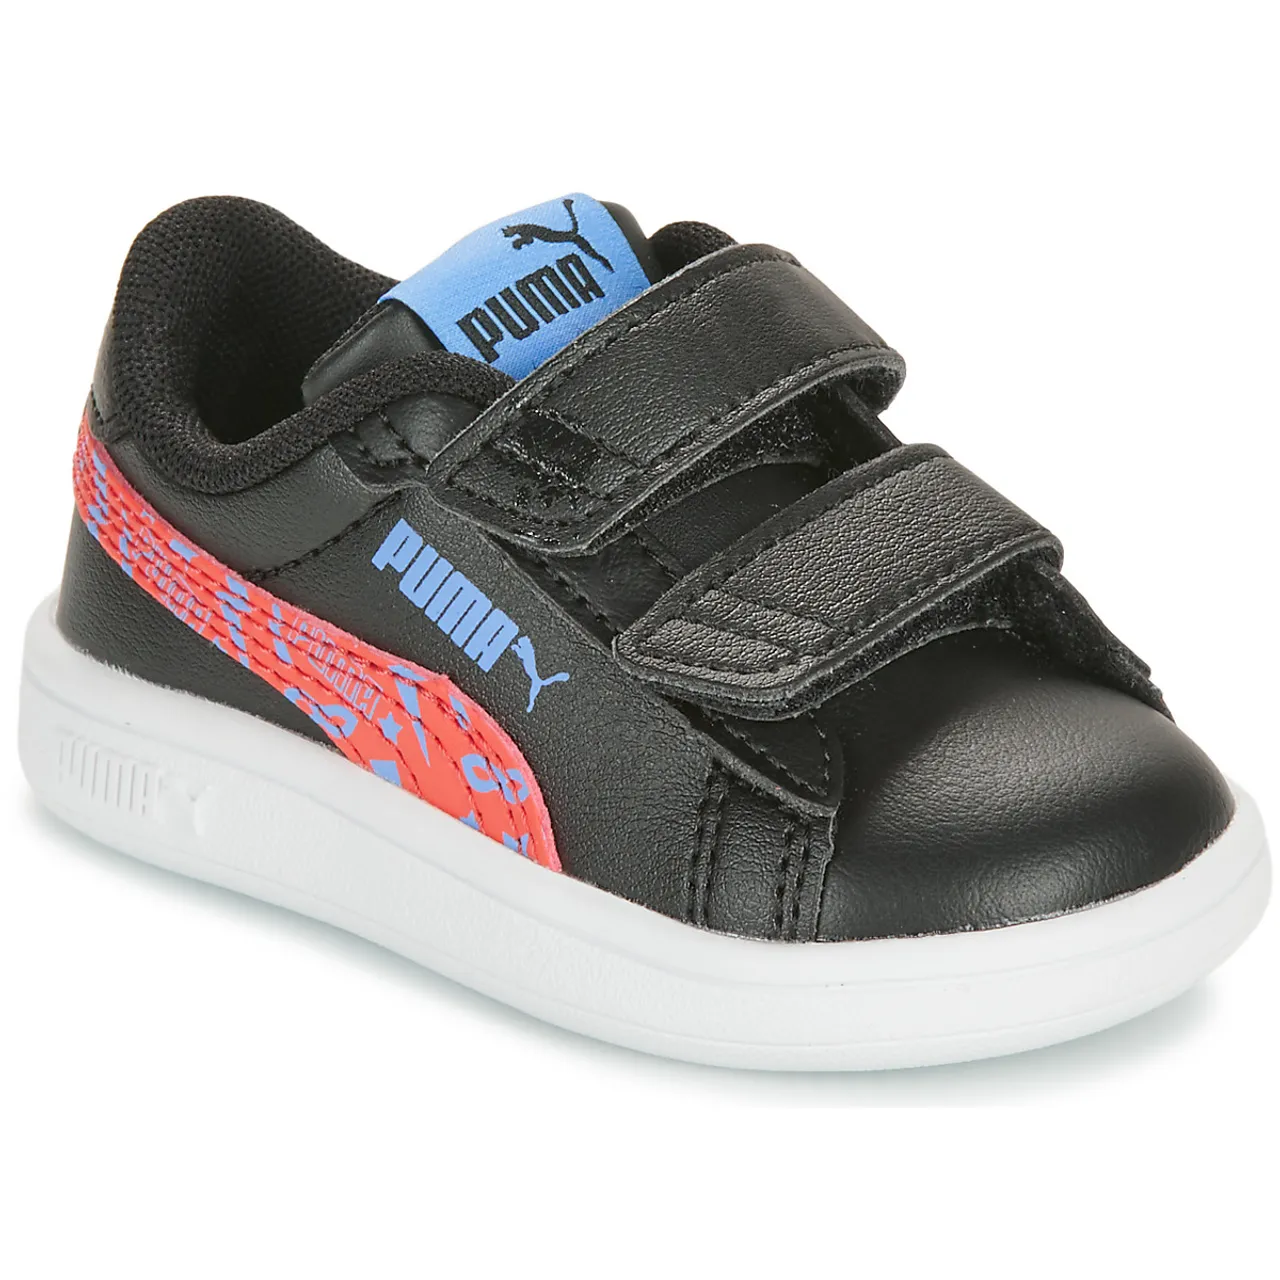 Puma  SMASH 3.0 L INF  boys's Children's Shoes (Trainers) in Black